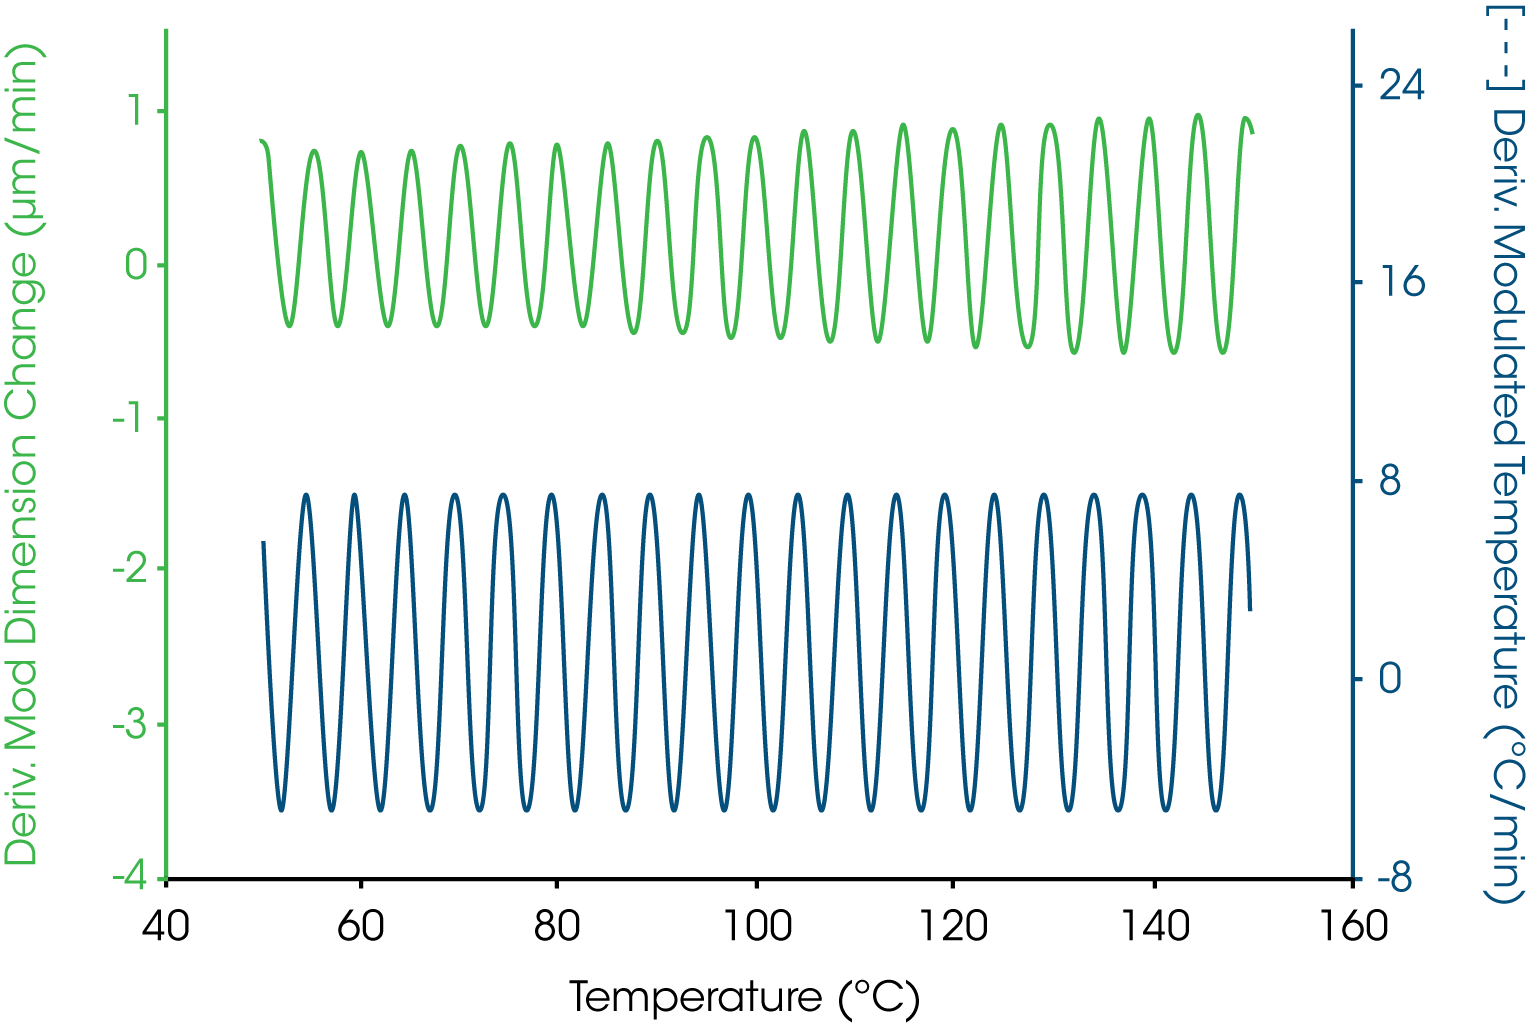 Figure 1. Modulated Temperature and Resultant Modulated Length